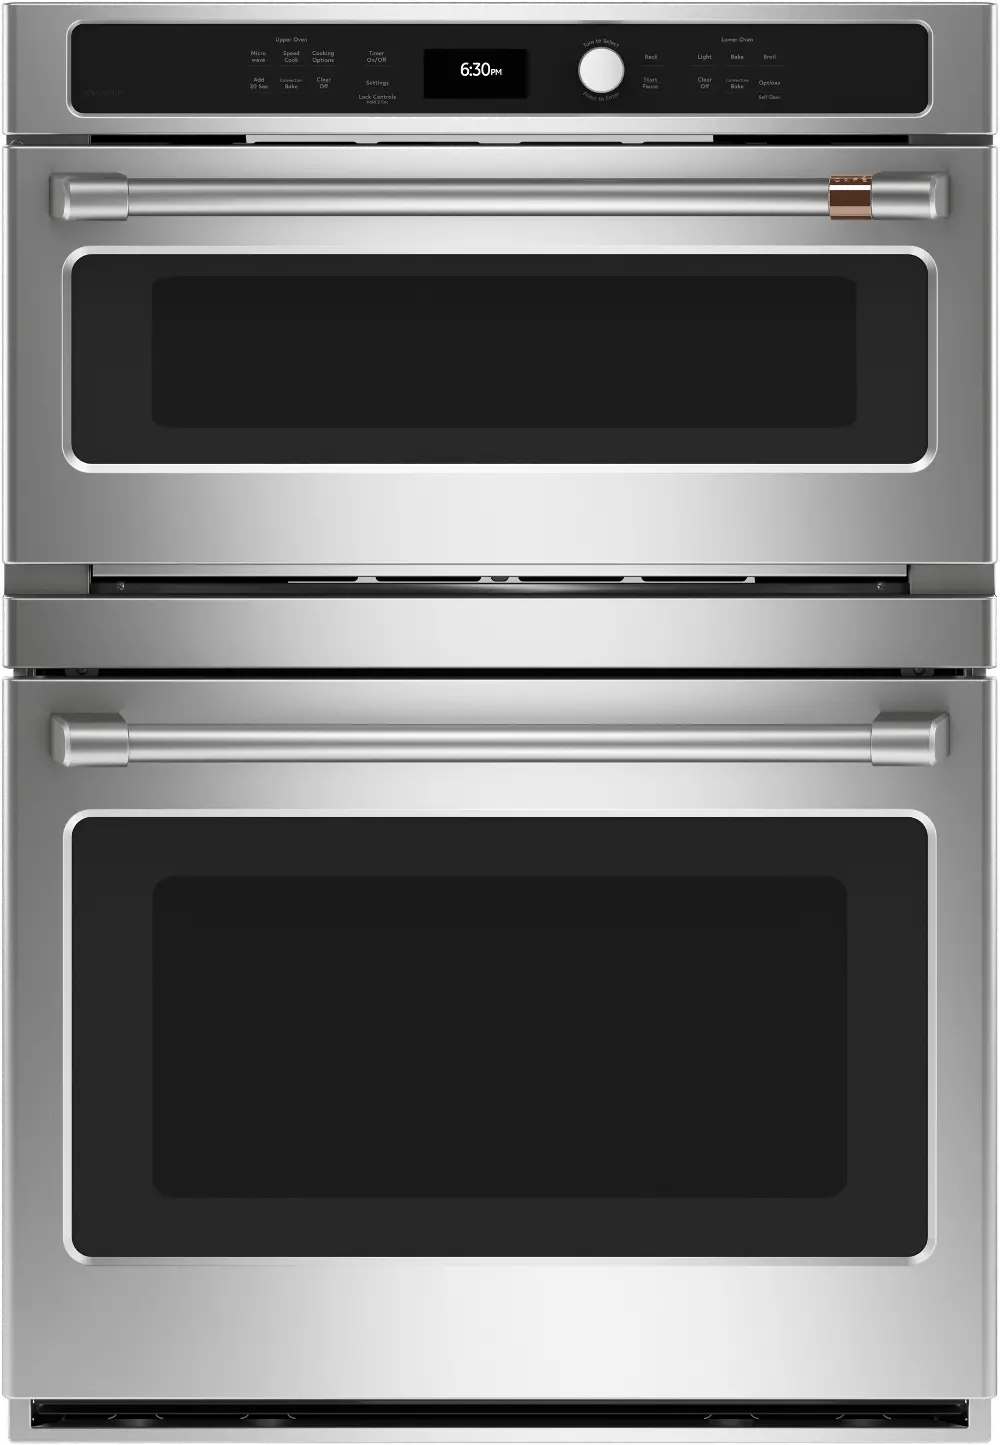 CTC912P2NS1 Cafe 6.7 cu ft Combination Wall Oven - Stainless Steel 30 Inch-1